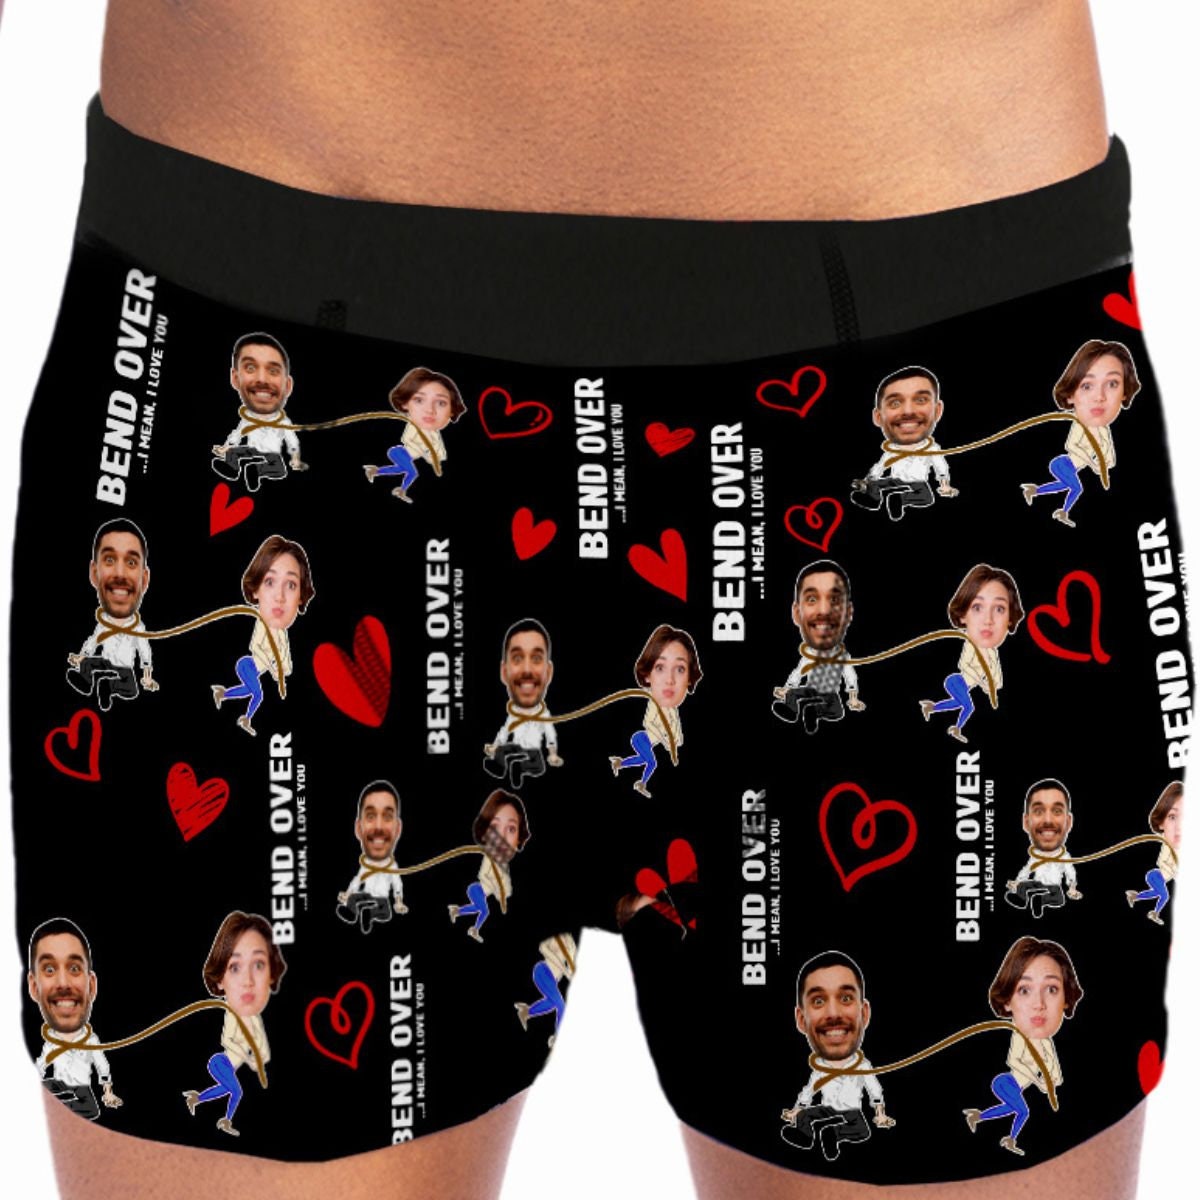 Playfully Romantic: 'Bend Over, I Mean, I Love You' Custom Women's Underwear